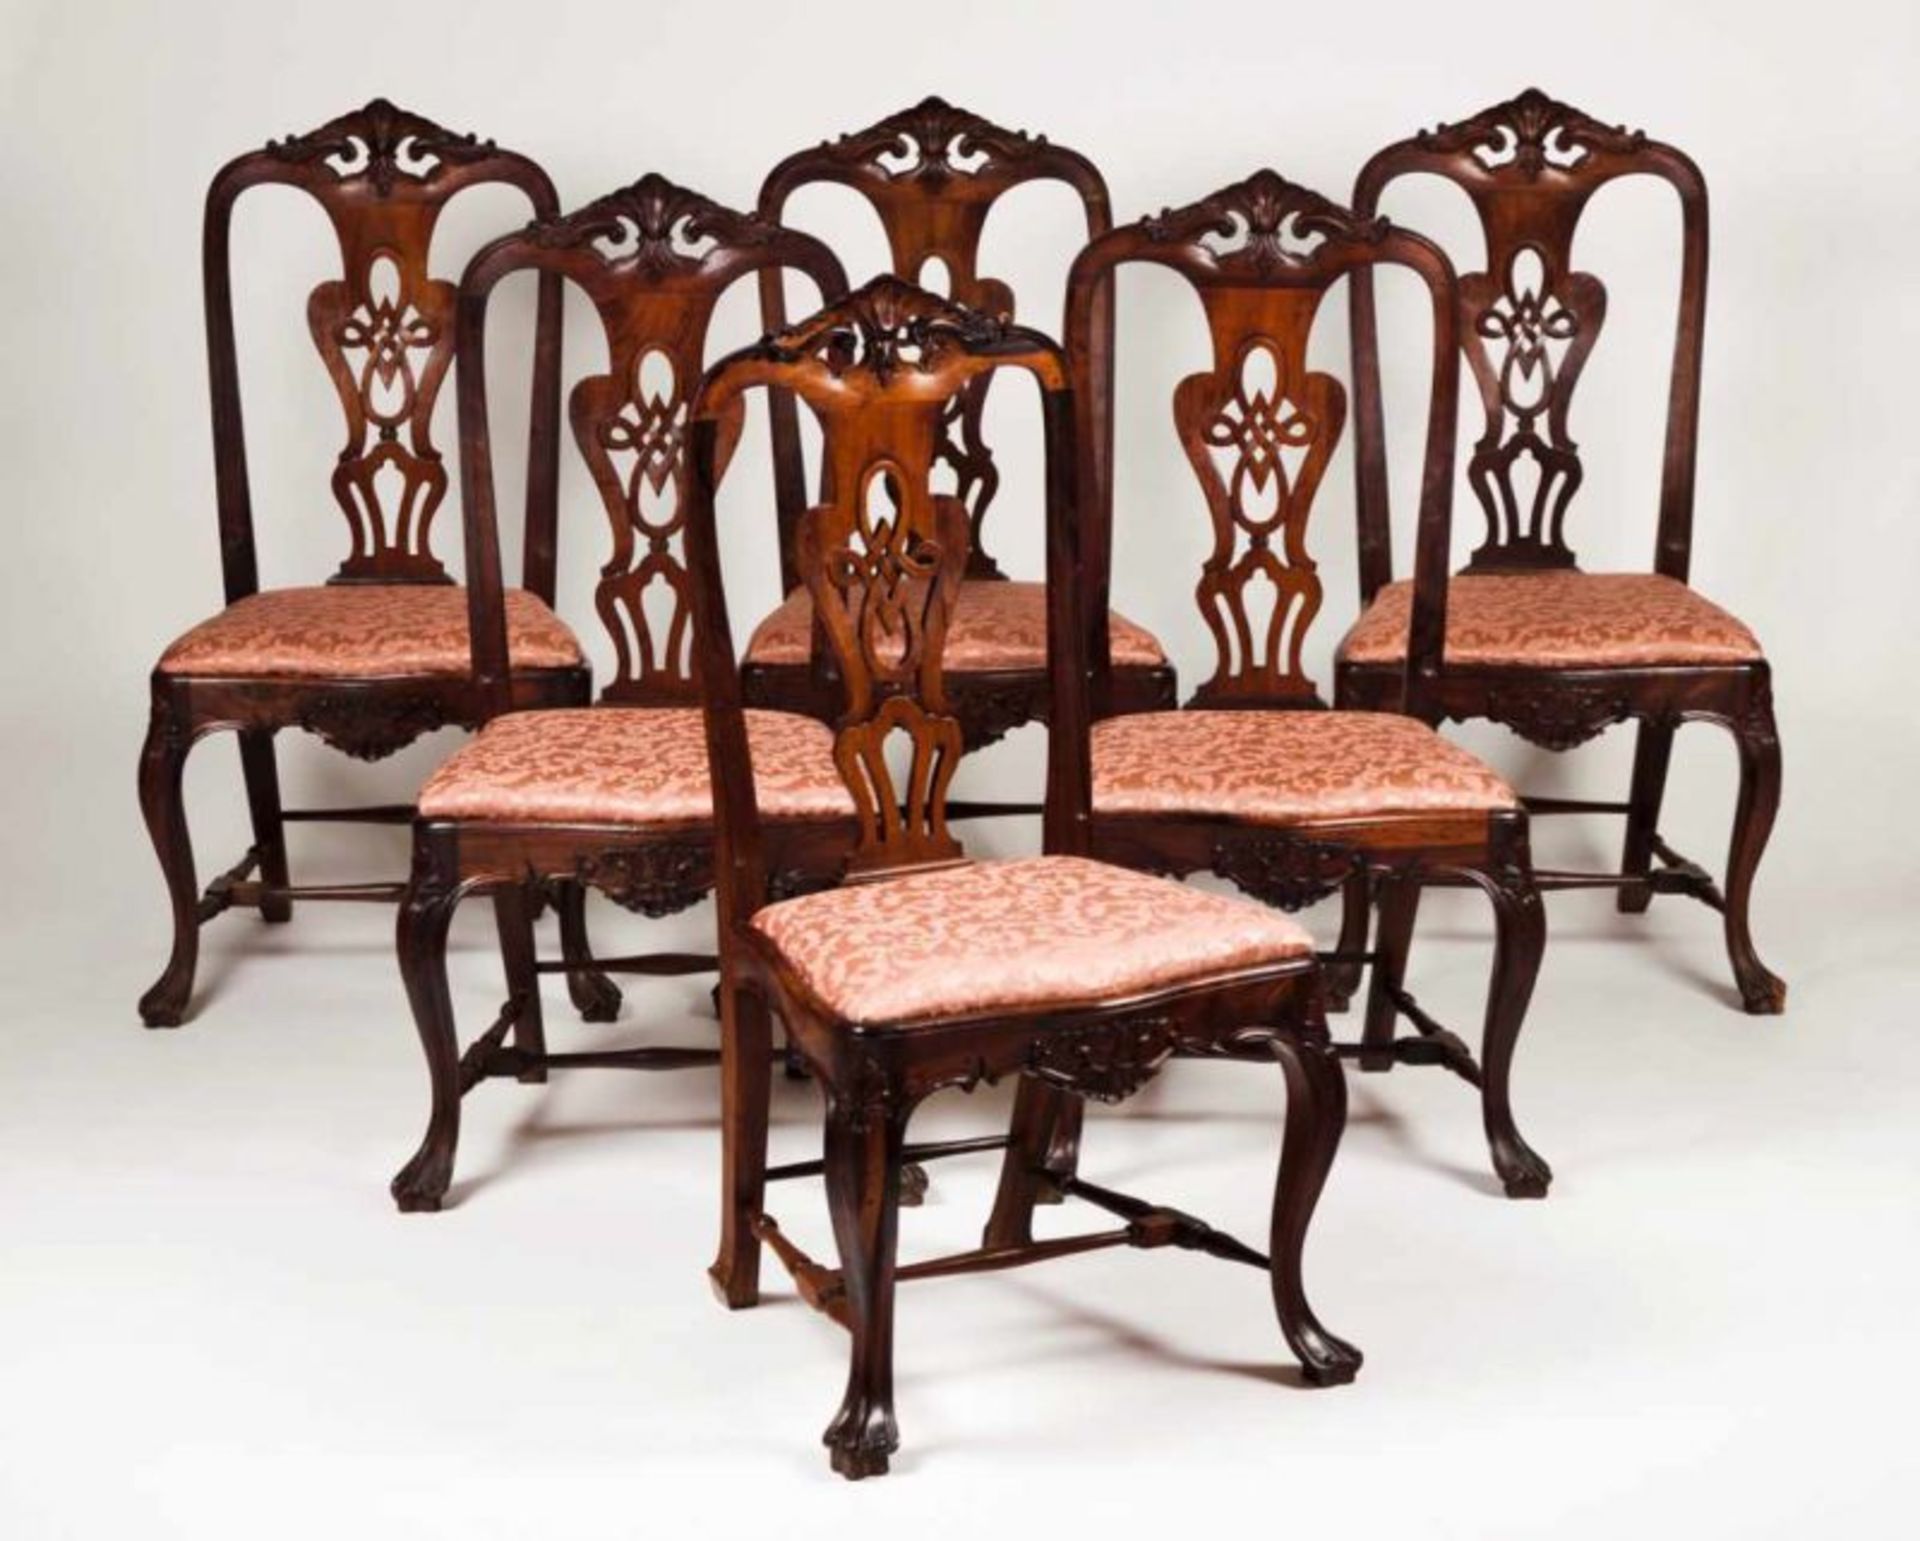 A set of six D. José style chairs Rosewood Pierced, scalloped and carved backs with floral motifs